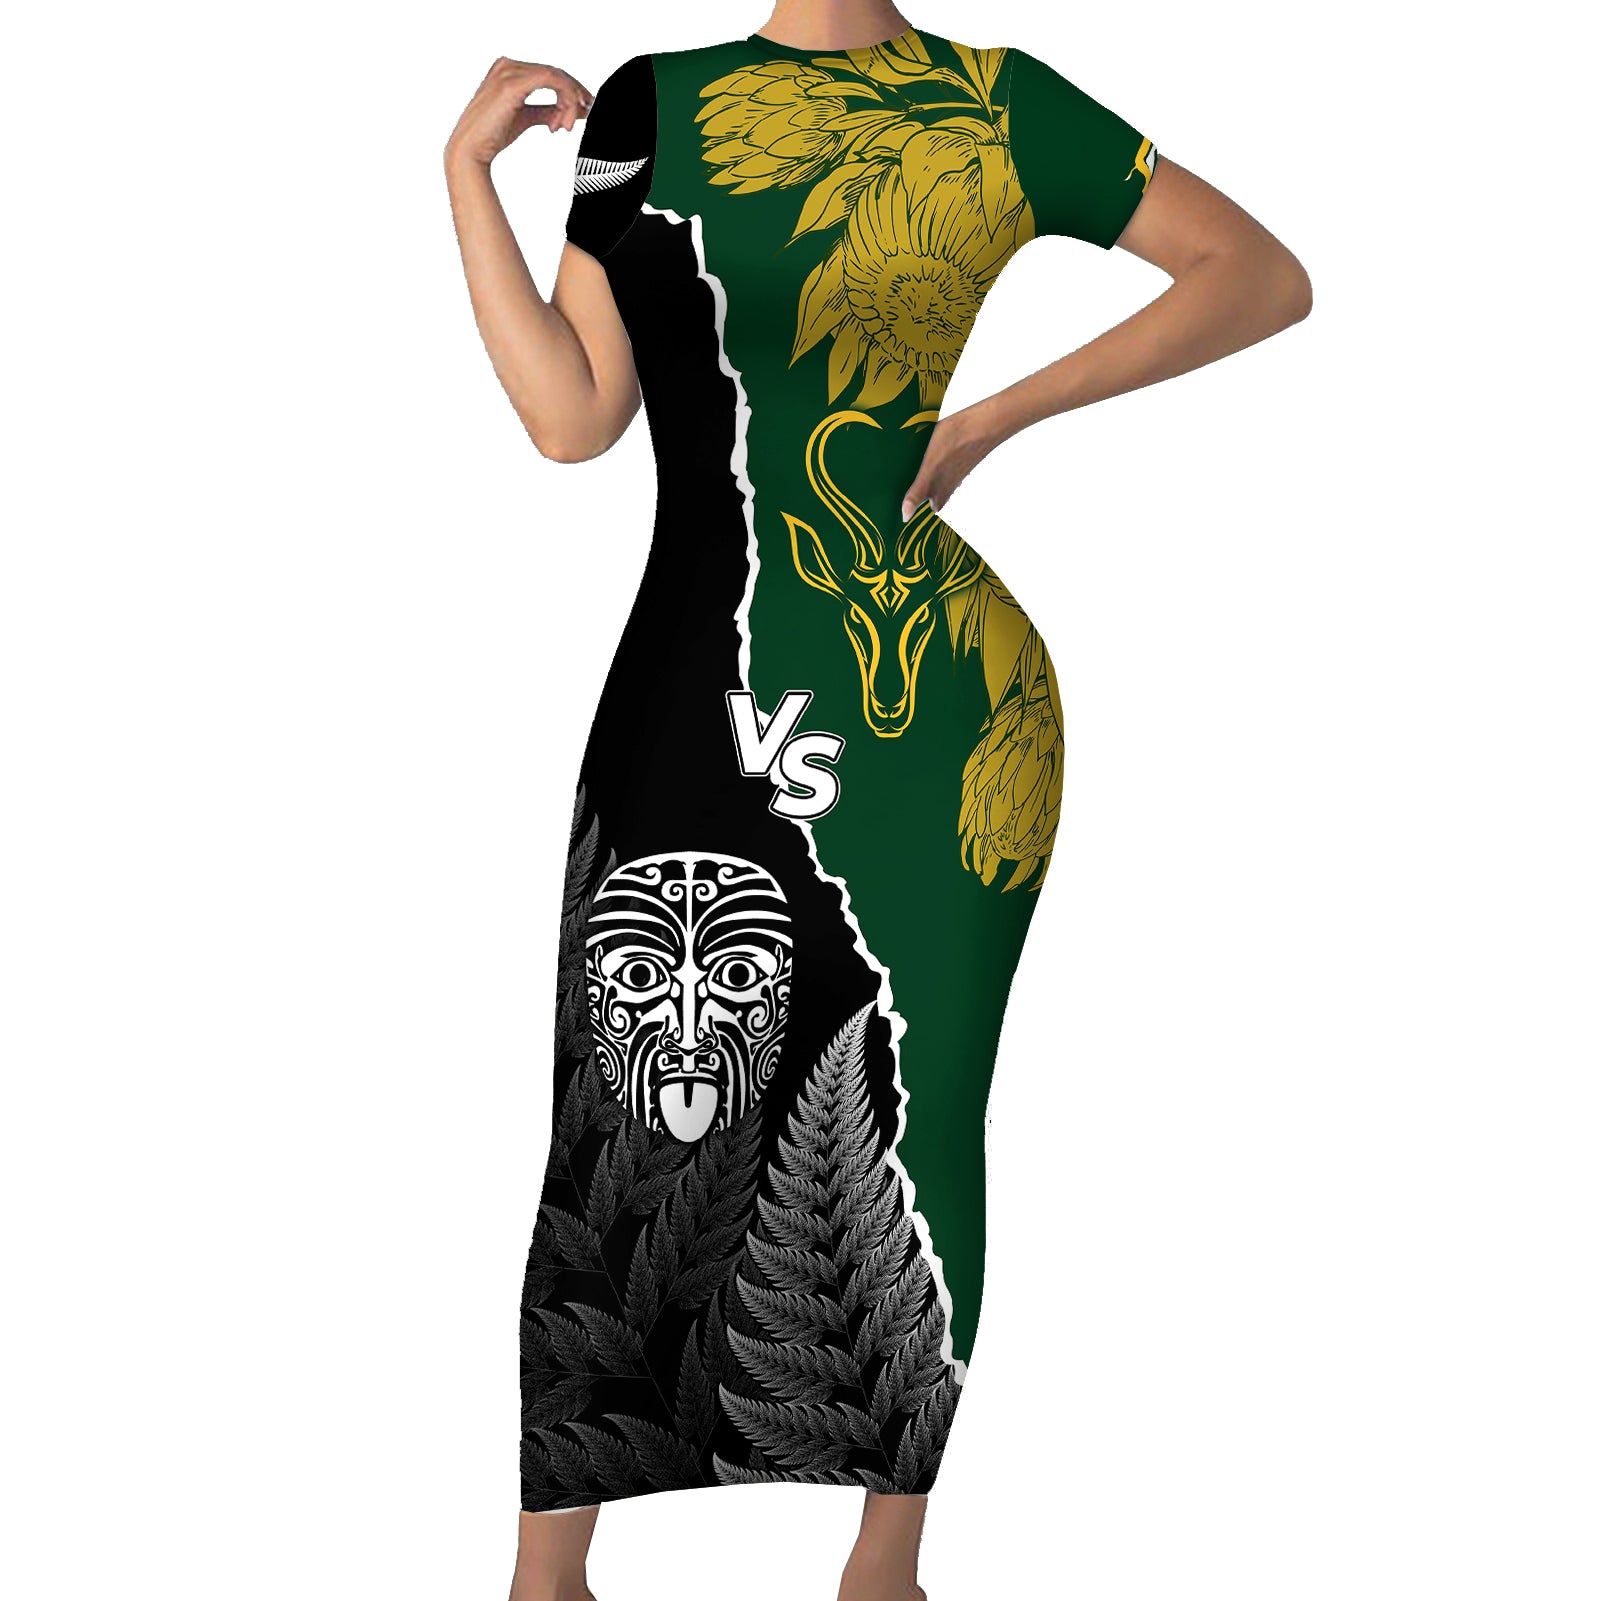 Personalised New Zealand Vs South Africa Rugby Short Sleeve Bodycon Dress Rivals Dynamics LT7 Long Dress Black Green - Polynesian Pride